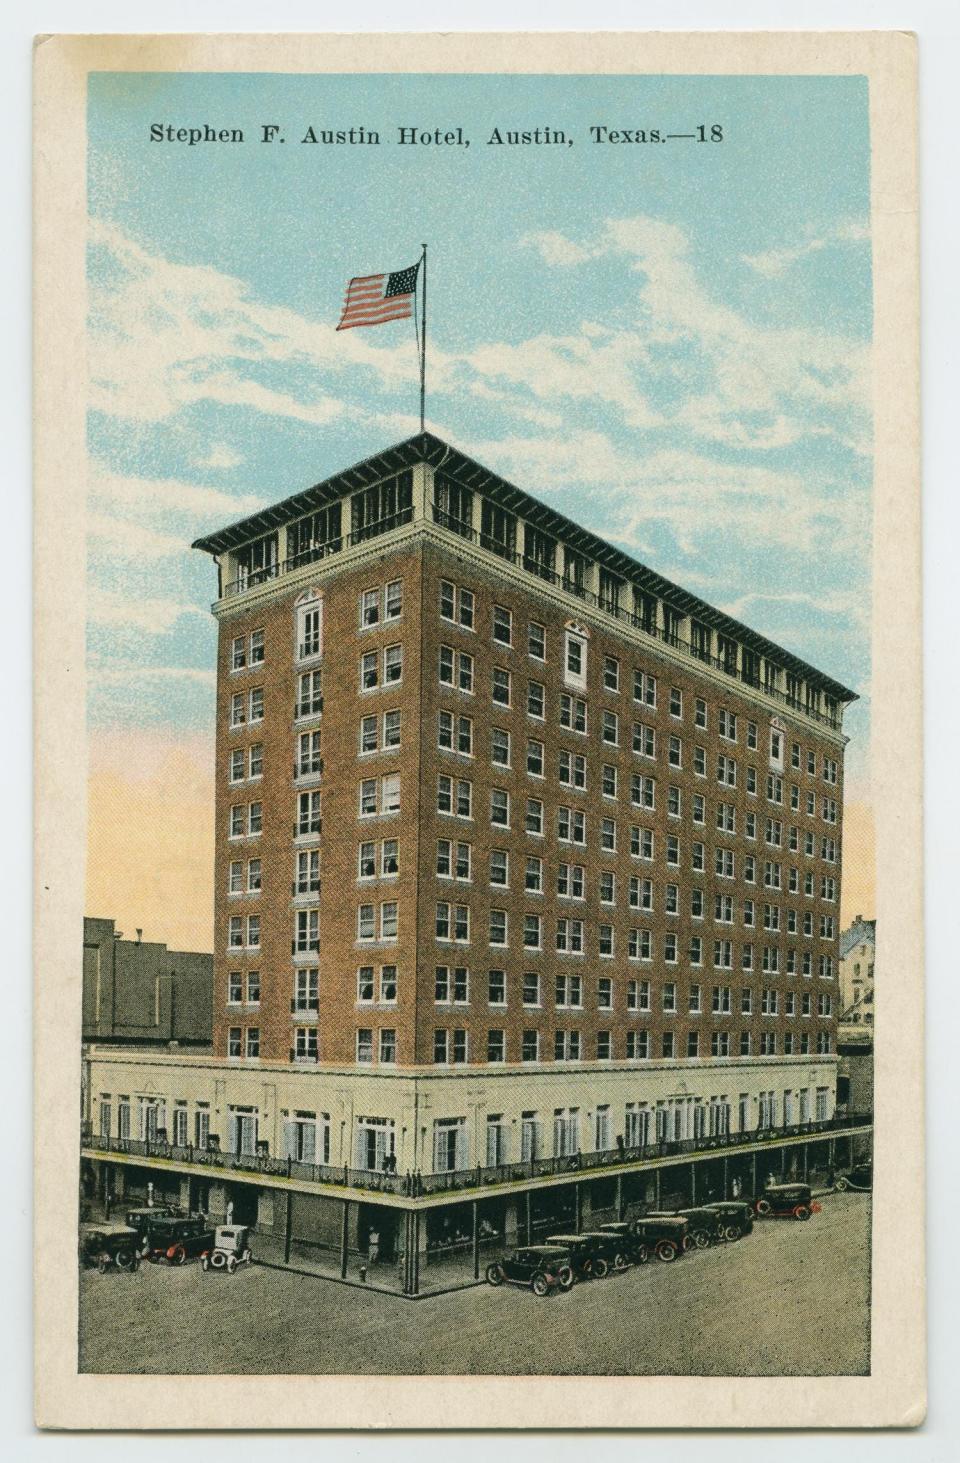 This postcard shows the Stephen F. Austin Hotel soon after it opened in 1924 at Congress Avenue and East Seventh Street. Note the rooftop garden at the top, no longer there.